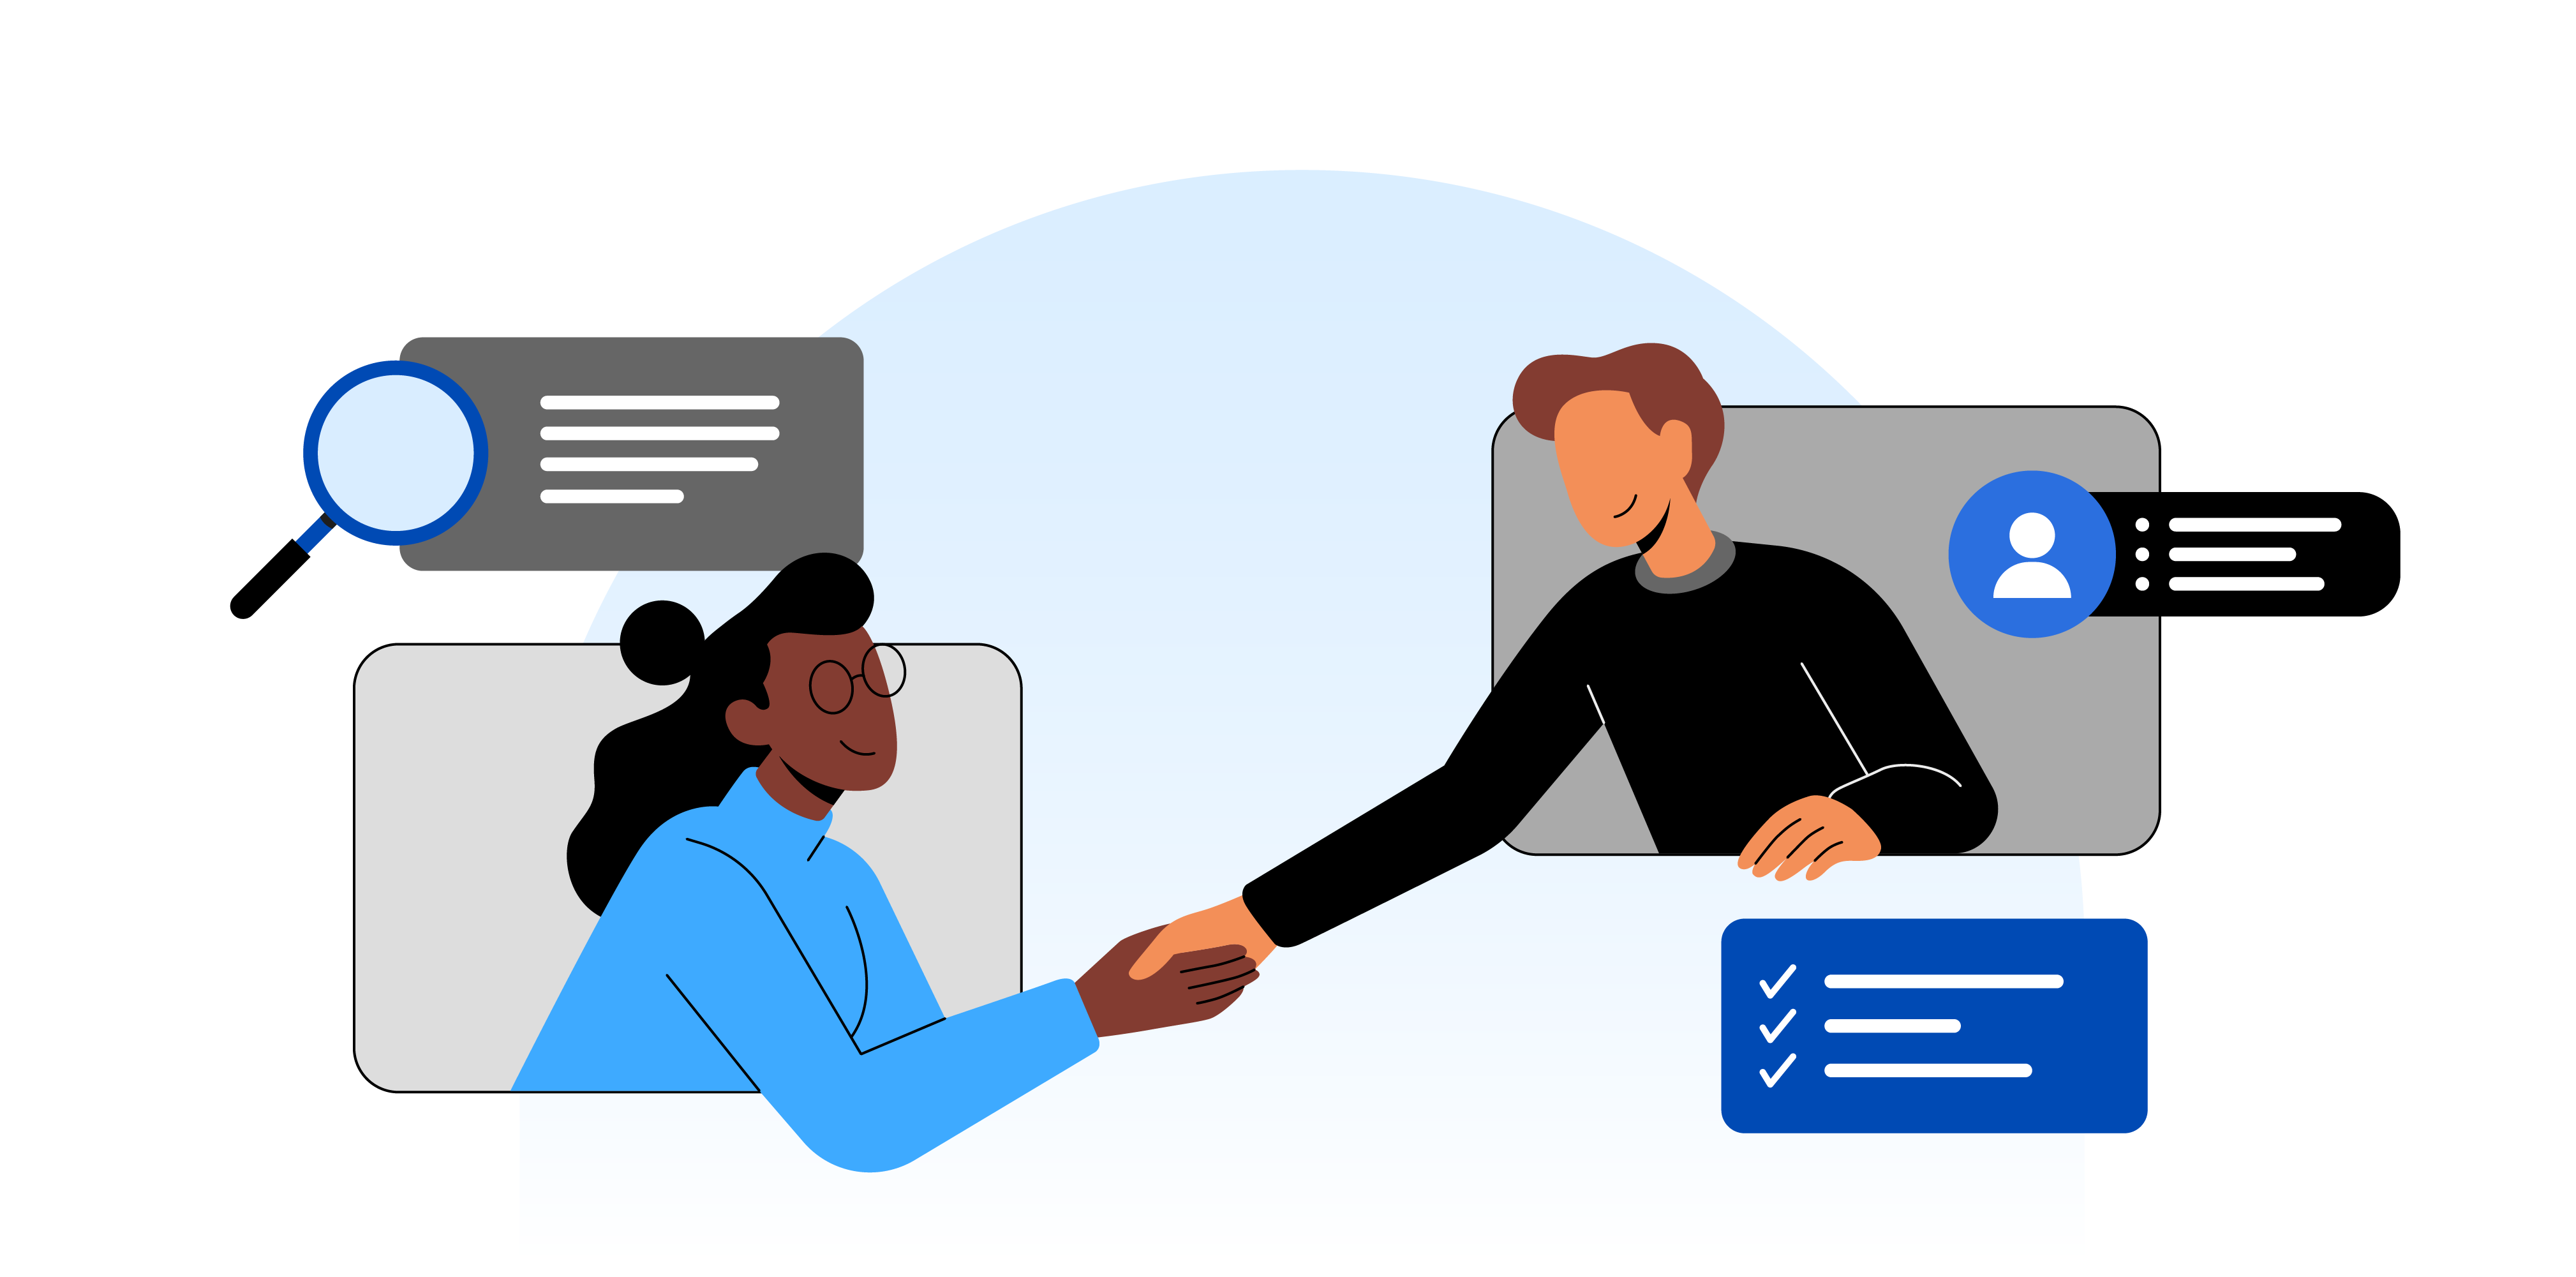 Illustration of two people shaking hands in a digital environment.